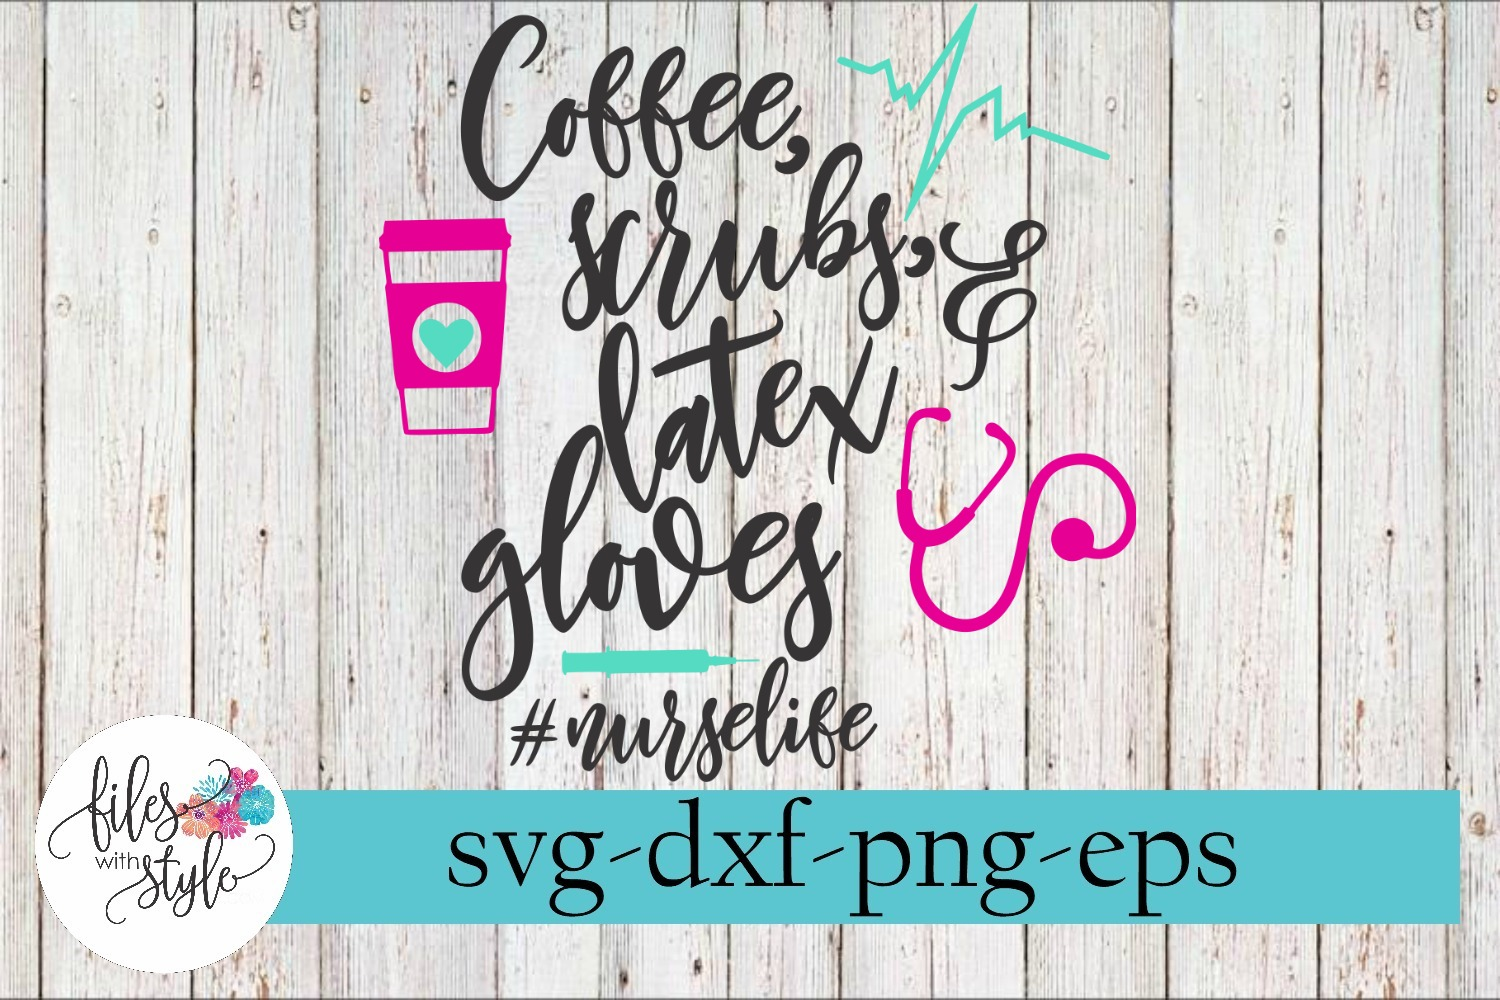 Free Free 203 Coffee Scrubs And Rubber Gloves Svg Free SVG PNG EPS DXF File